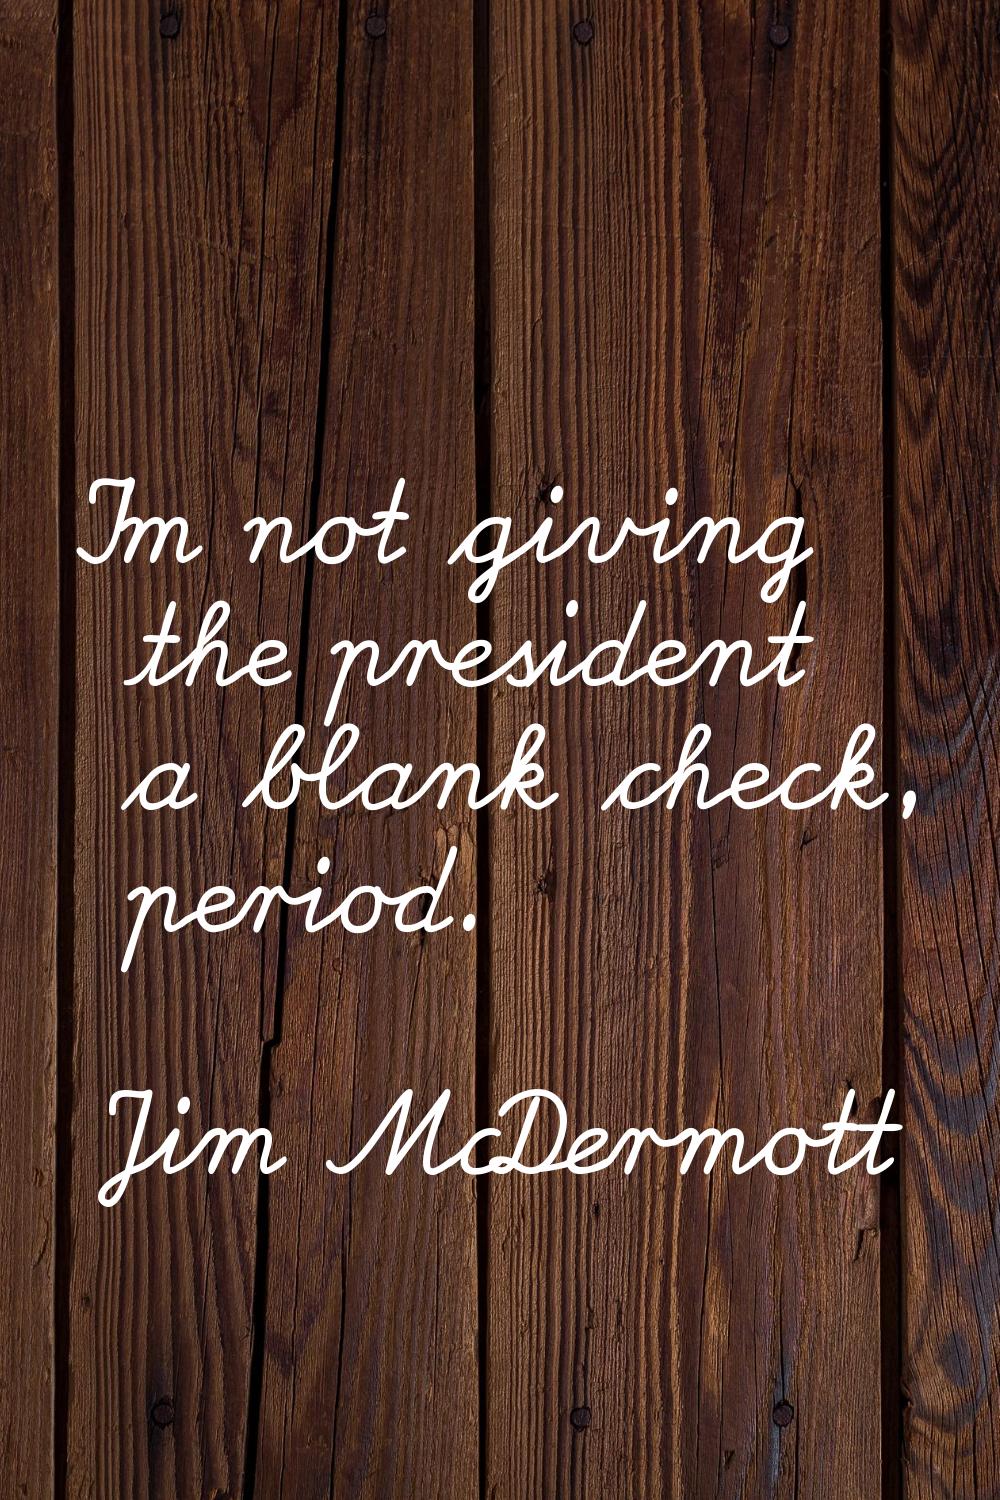 I'm not giving the president a blank check, period.